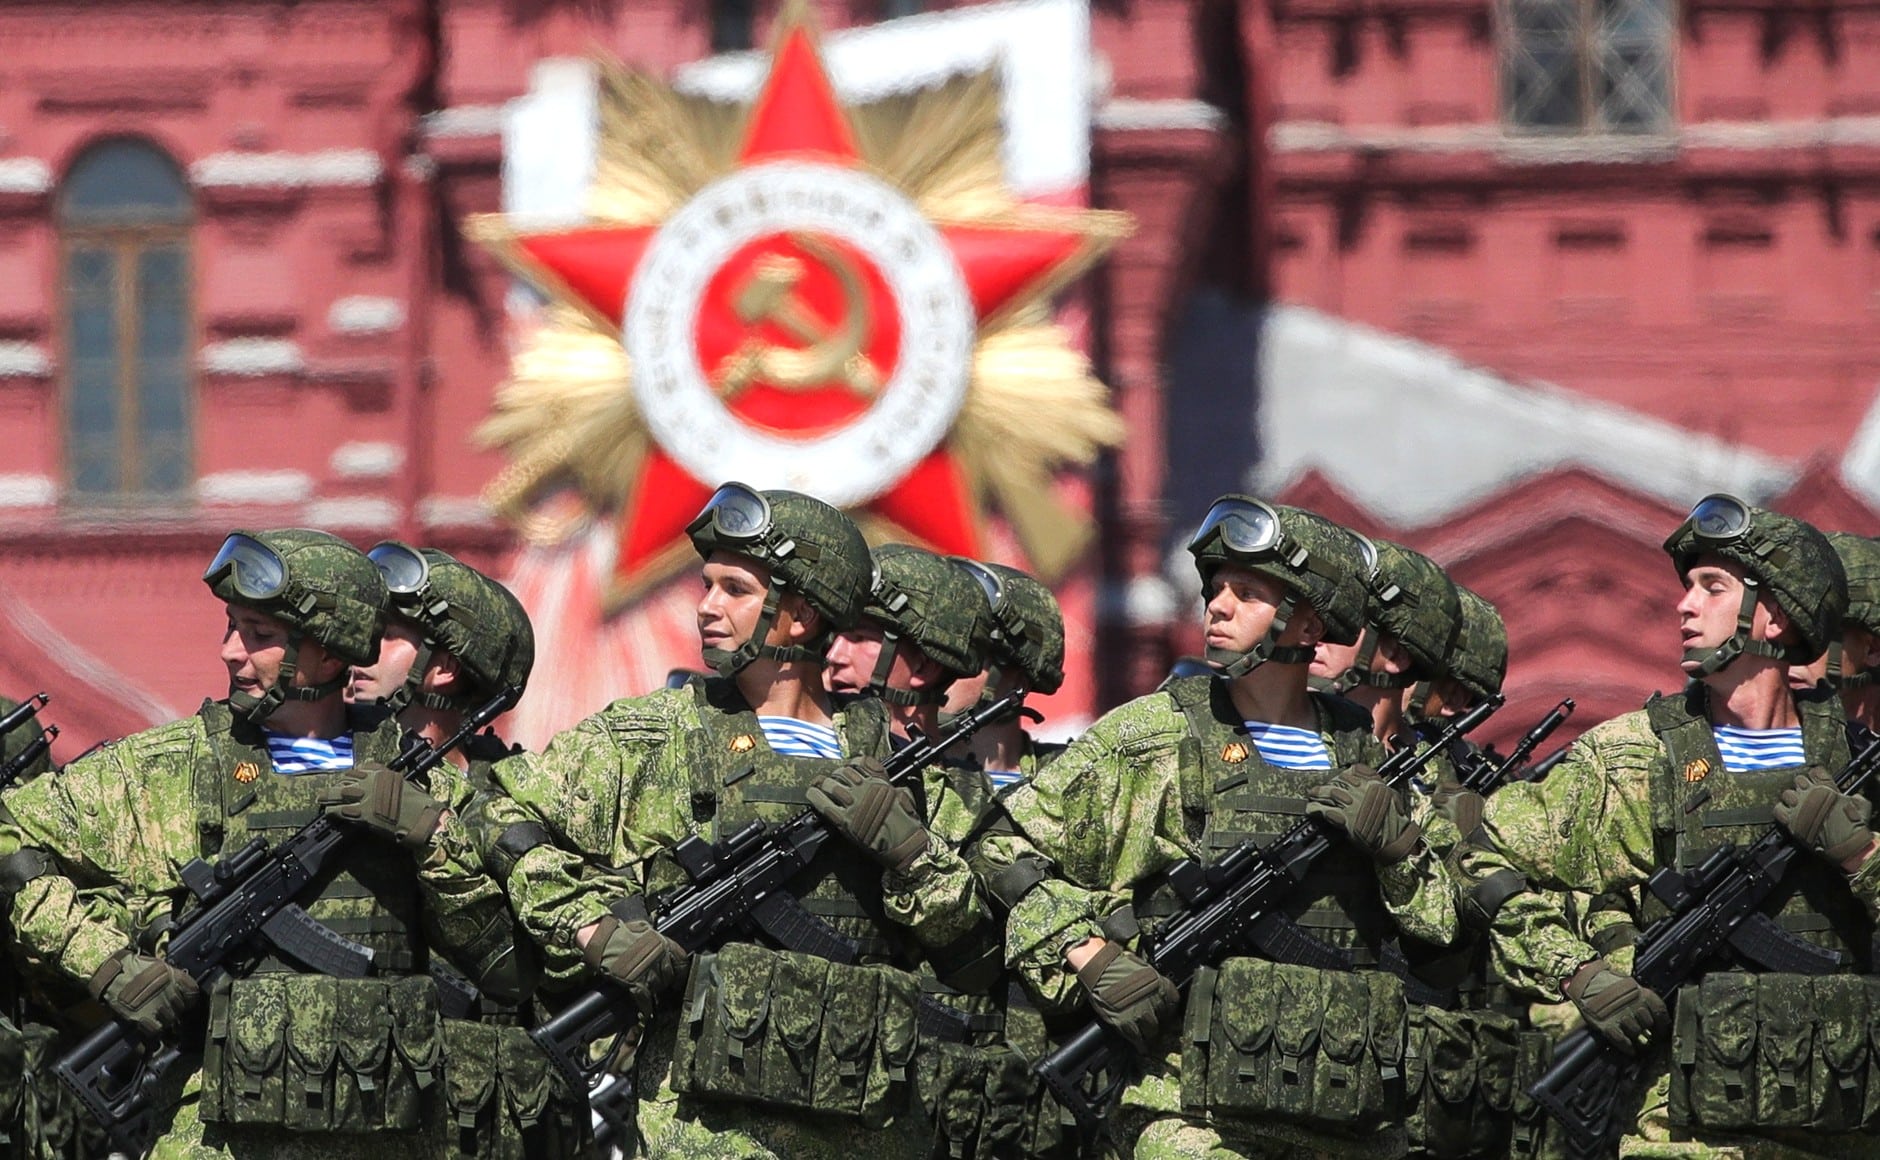 https://thebulletin.org/wp-content/uploads/2023/05/2020_Moscow_Victory_Day_Parade_032-150x150.jpg